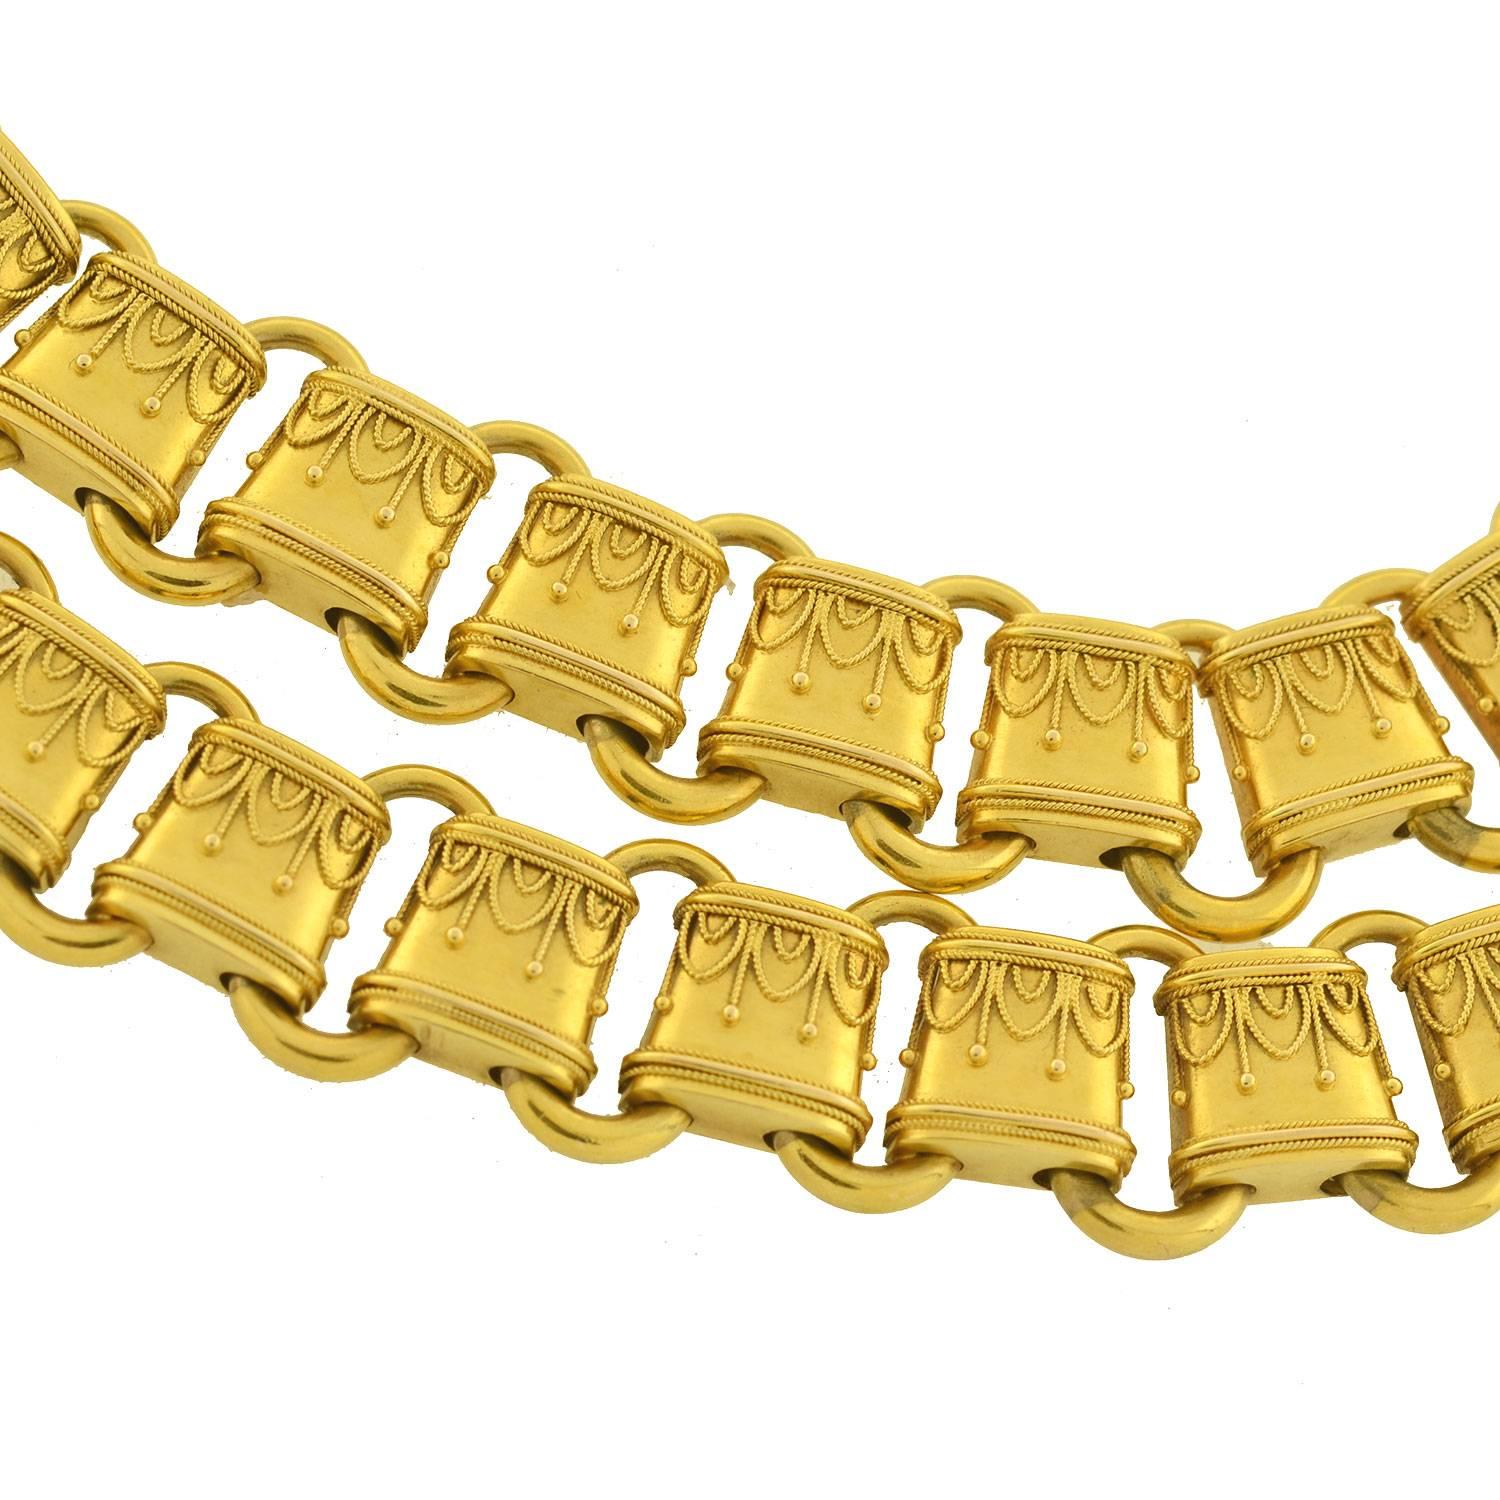 This gold book chain from the Victorian era (ca1880) is quite an outstanding piece! English in origin, it is hand crafted in vibrant 15ct yellow gold and has a wonderful Etruscan wirework motif applied to the surface. The design is comprised of